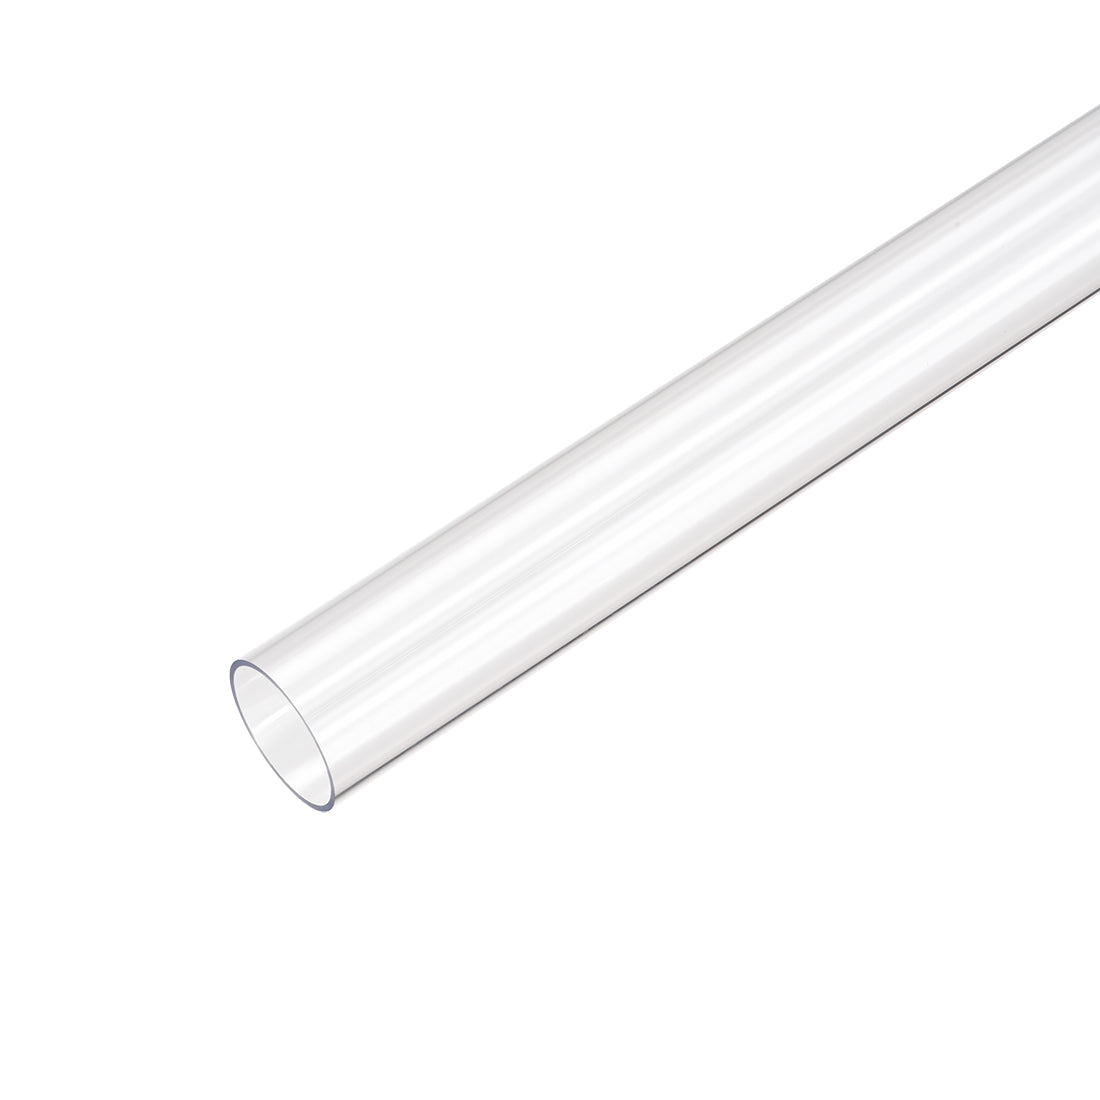 uxcell Uxcell PVC Rigid Round Tubing,Clear,15mm ID x 16mm OD,0.5M/1.64Ft Length,3pcs